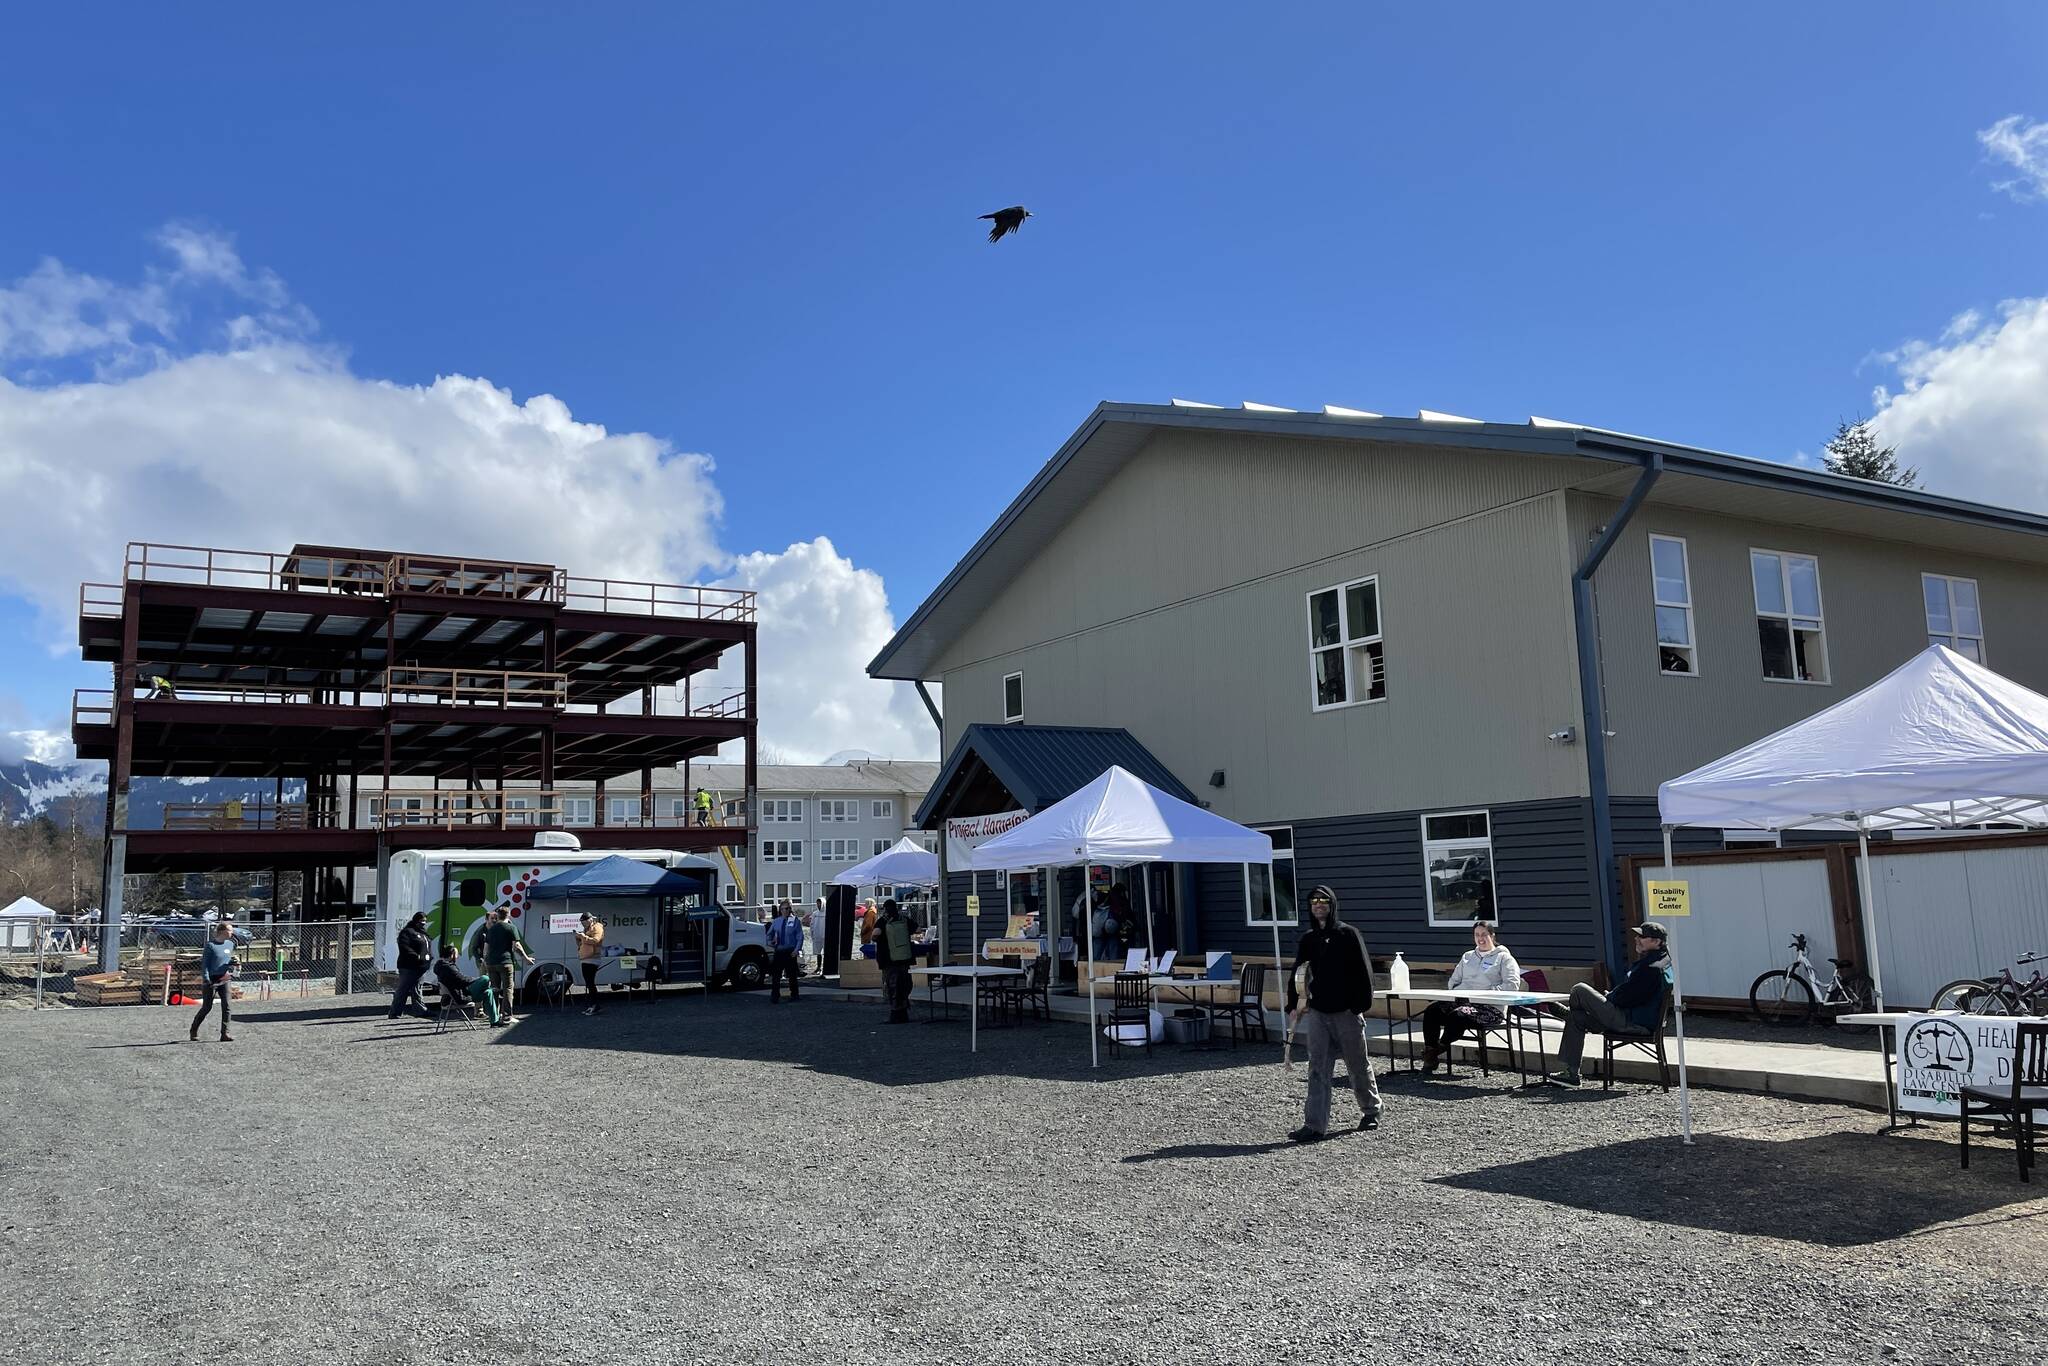 Service organizations came together with some of Juneau’s population experiencing homelessness and other providers on the Project Homeless Connect event on April 28, 2022 at the Glory Hall and St. Vincent de Paul Juneau. (Michael S. Lockett / Juneau Empire)